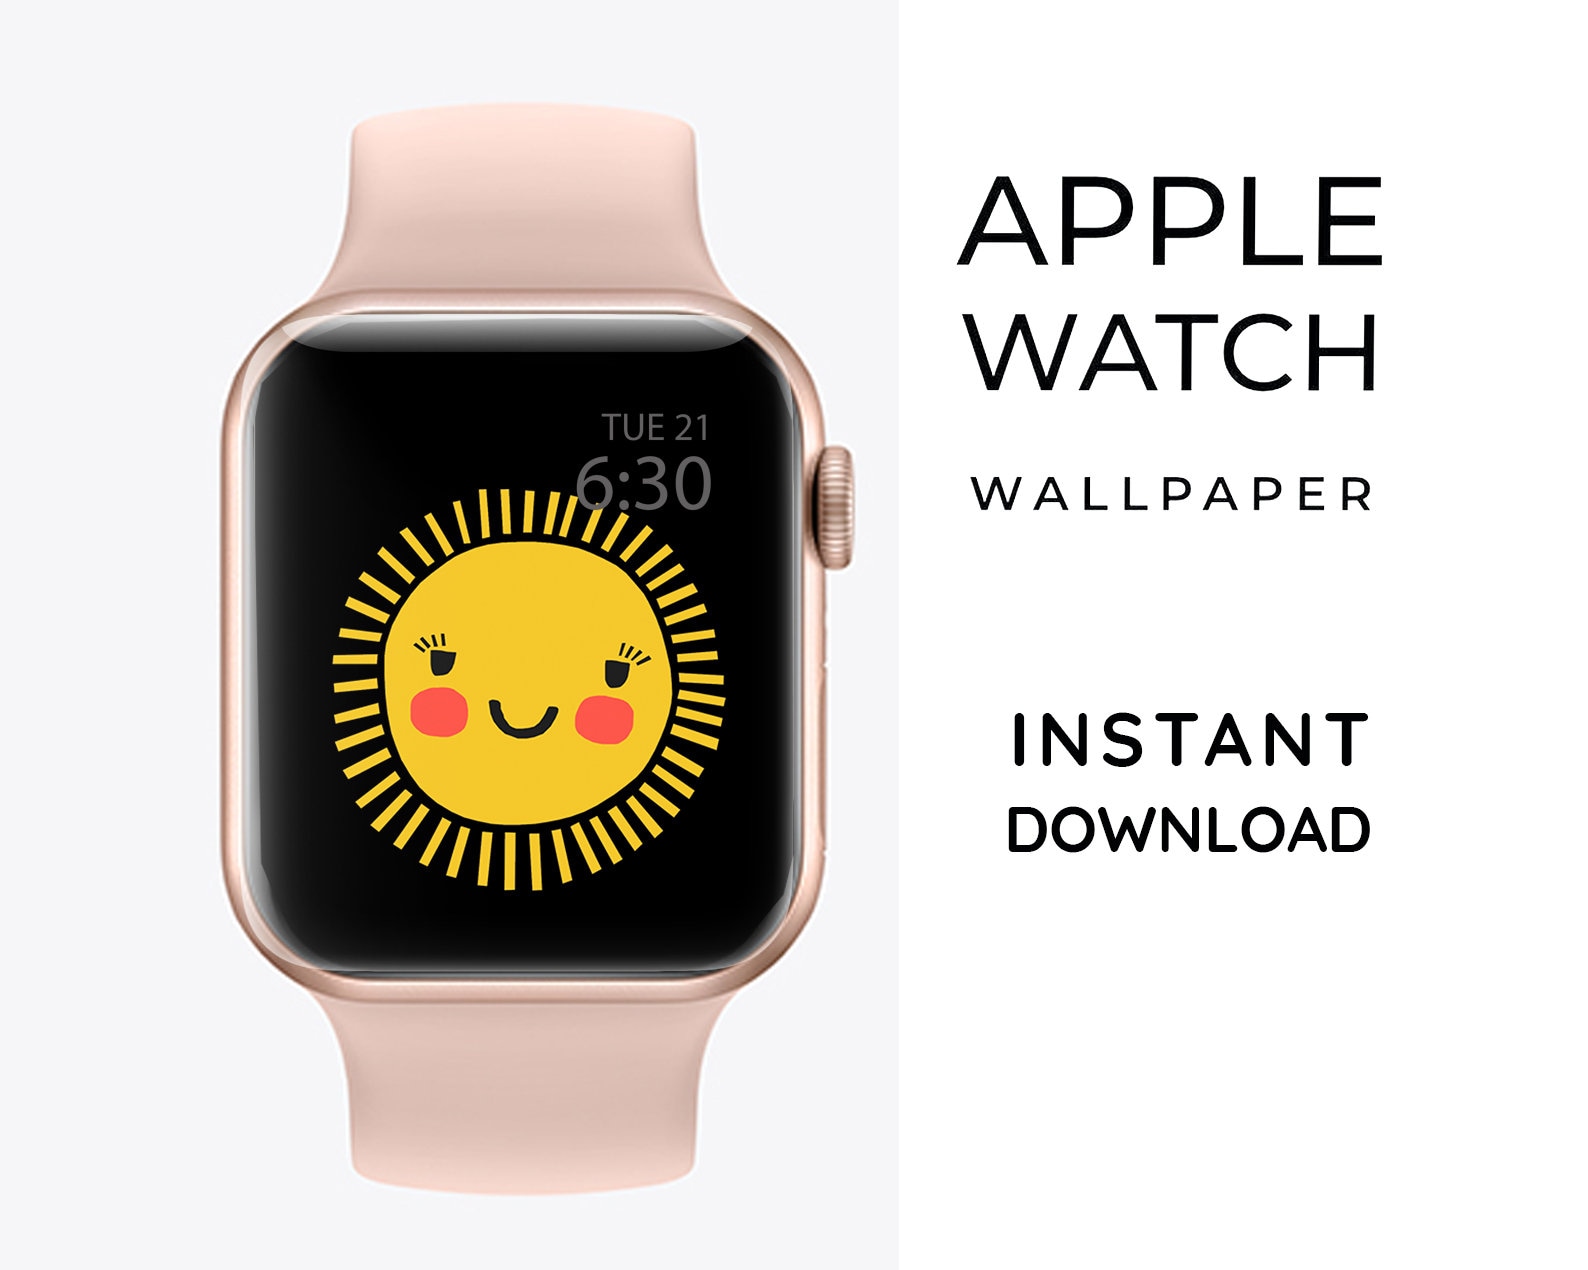 Apple Watch Wallpaper With Happy Sun and Black Background. - Etsy